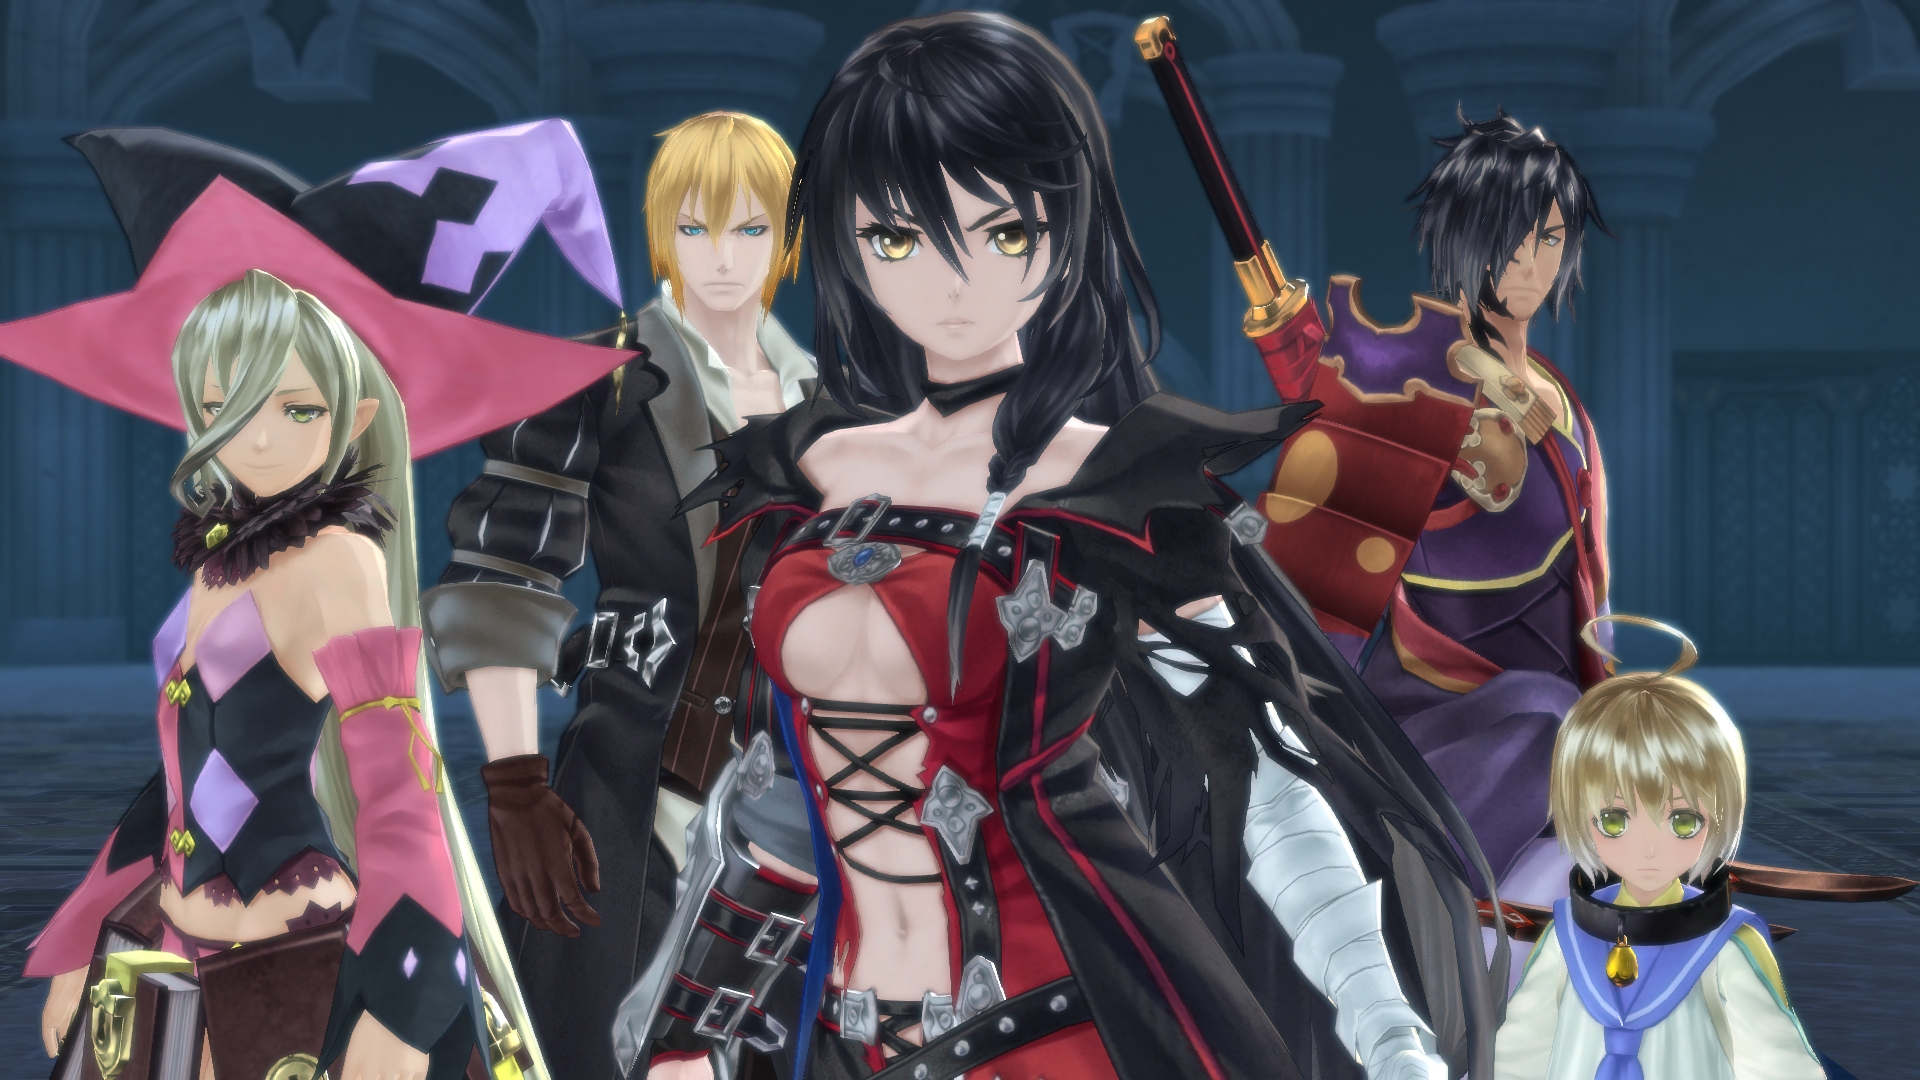 download tales of berseria release date for free